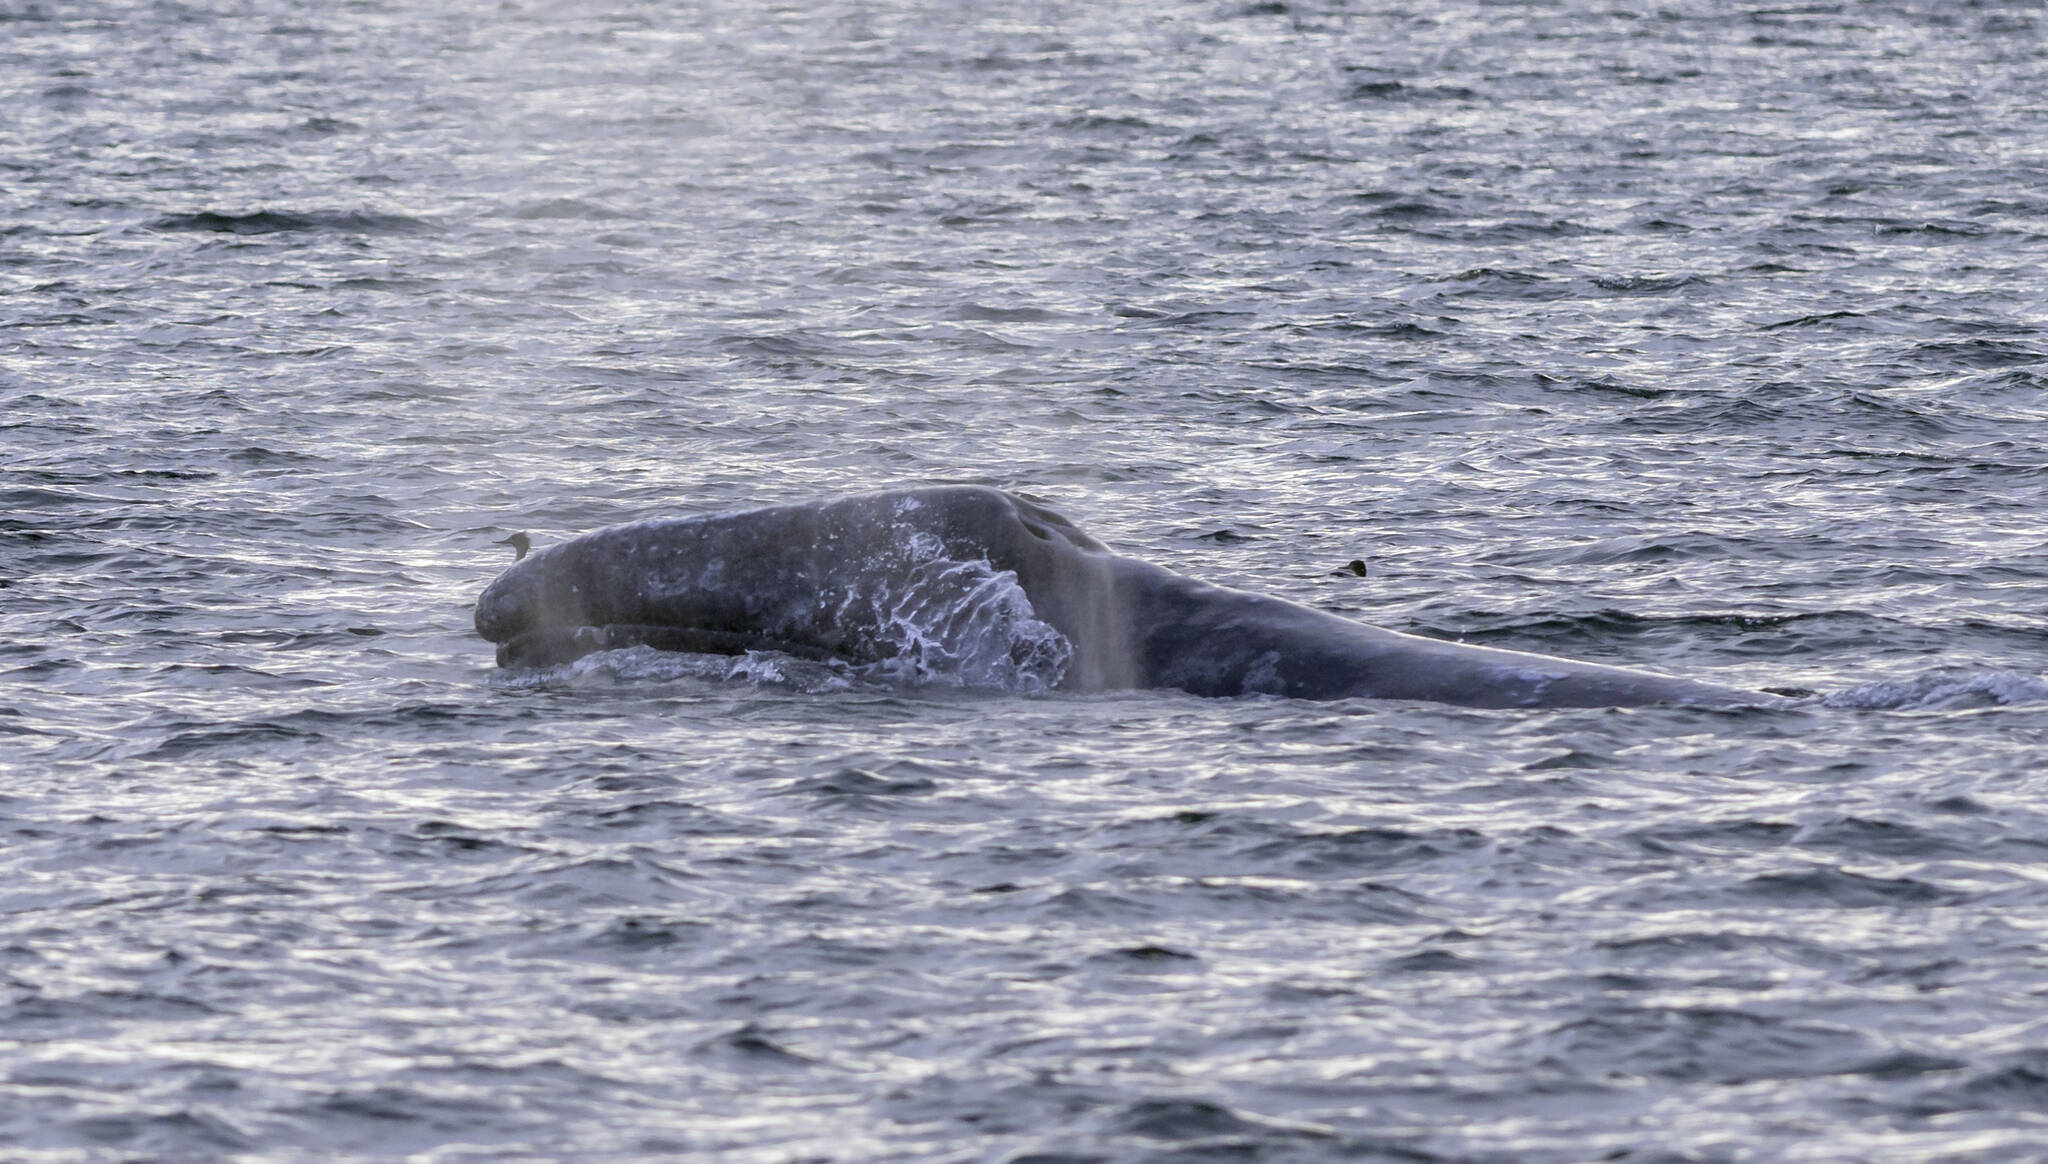 Photo by Bob VonDracheck
Little Patch is a gray whale who is known for returning early to the Puget Sound.